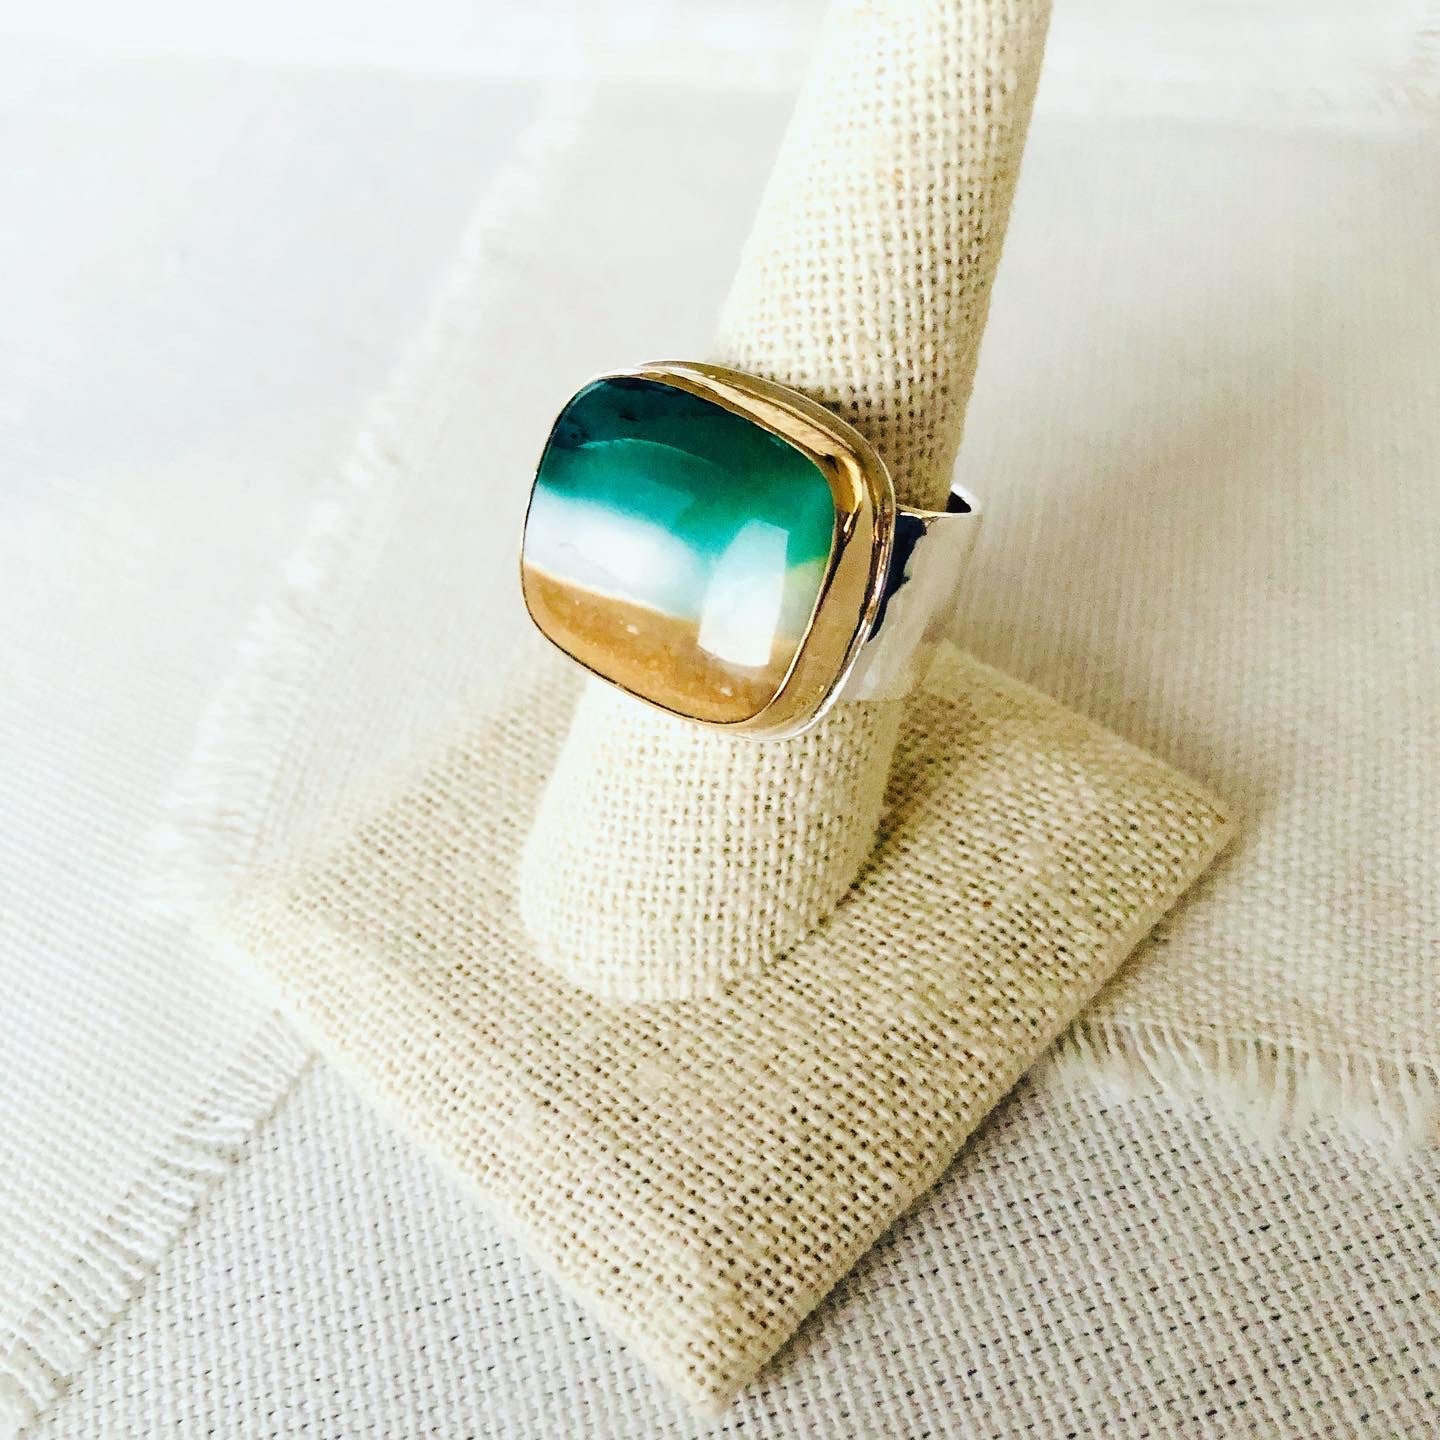 This incredible ring is made from blue opalized fossilized Indonesian wood and reminds me of the beaches of Mauil